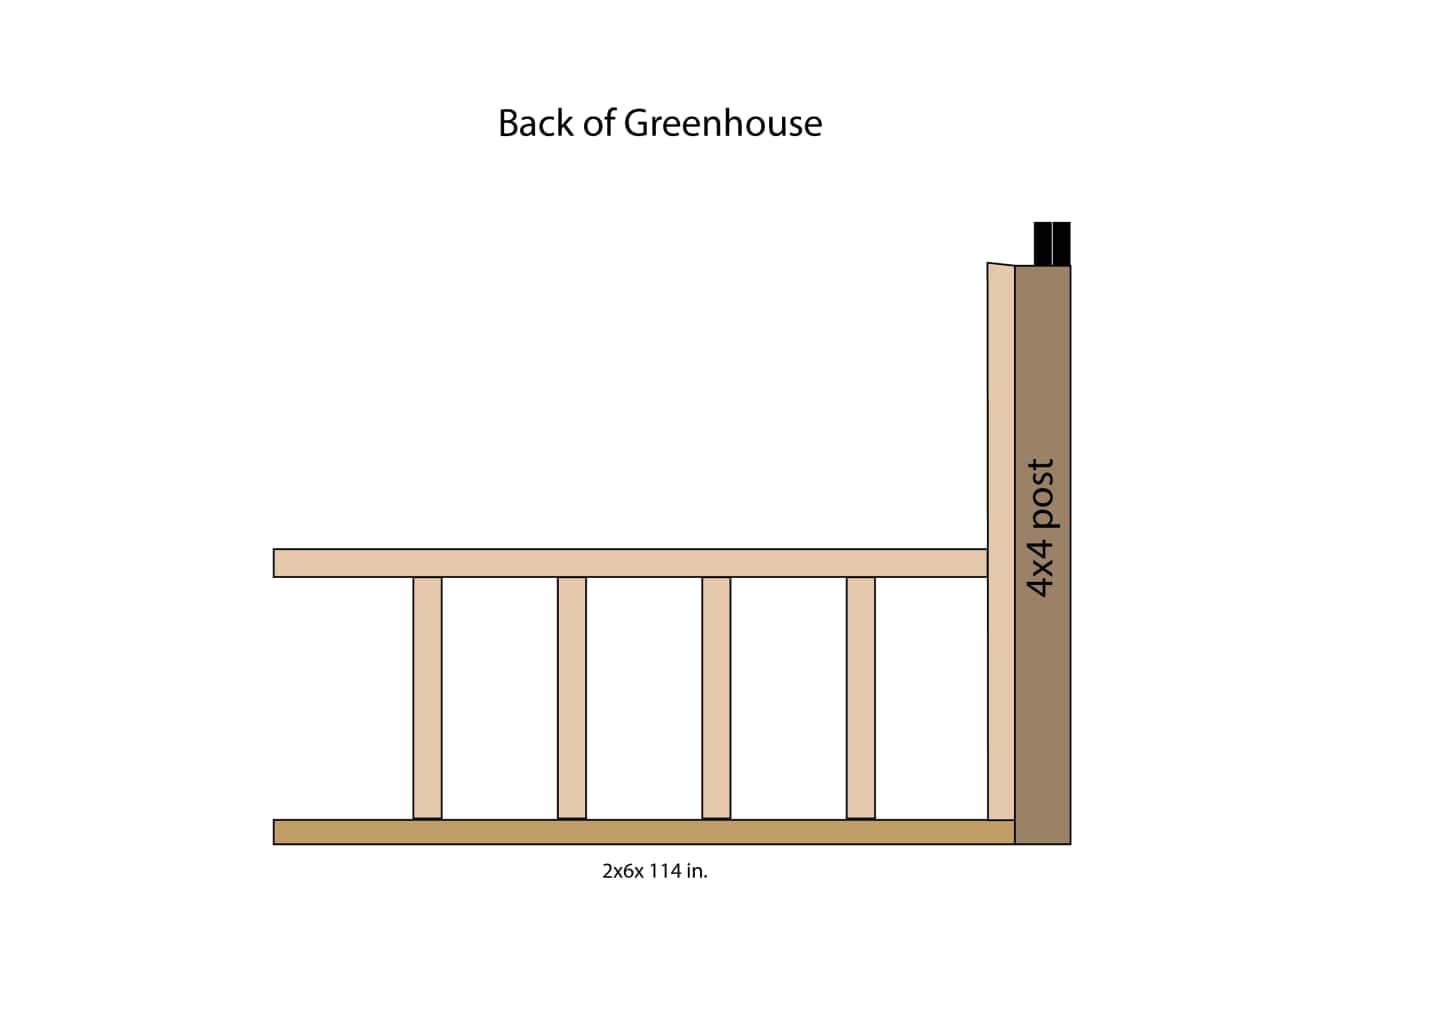 Diagram showing the back of the greenhouse.